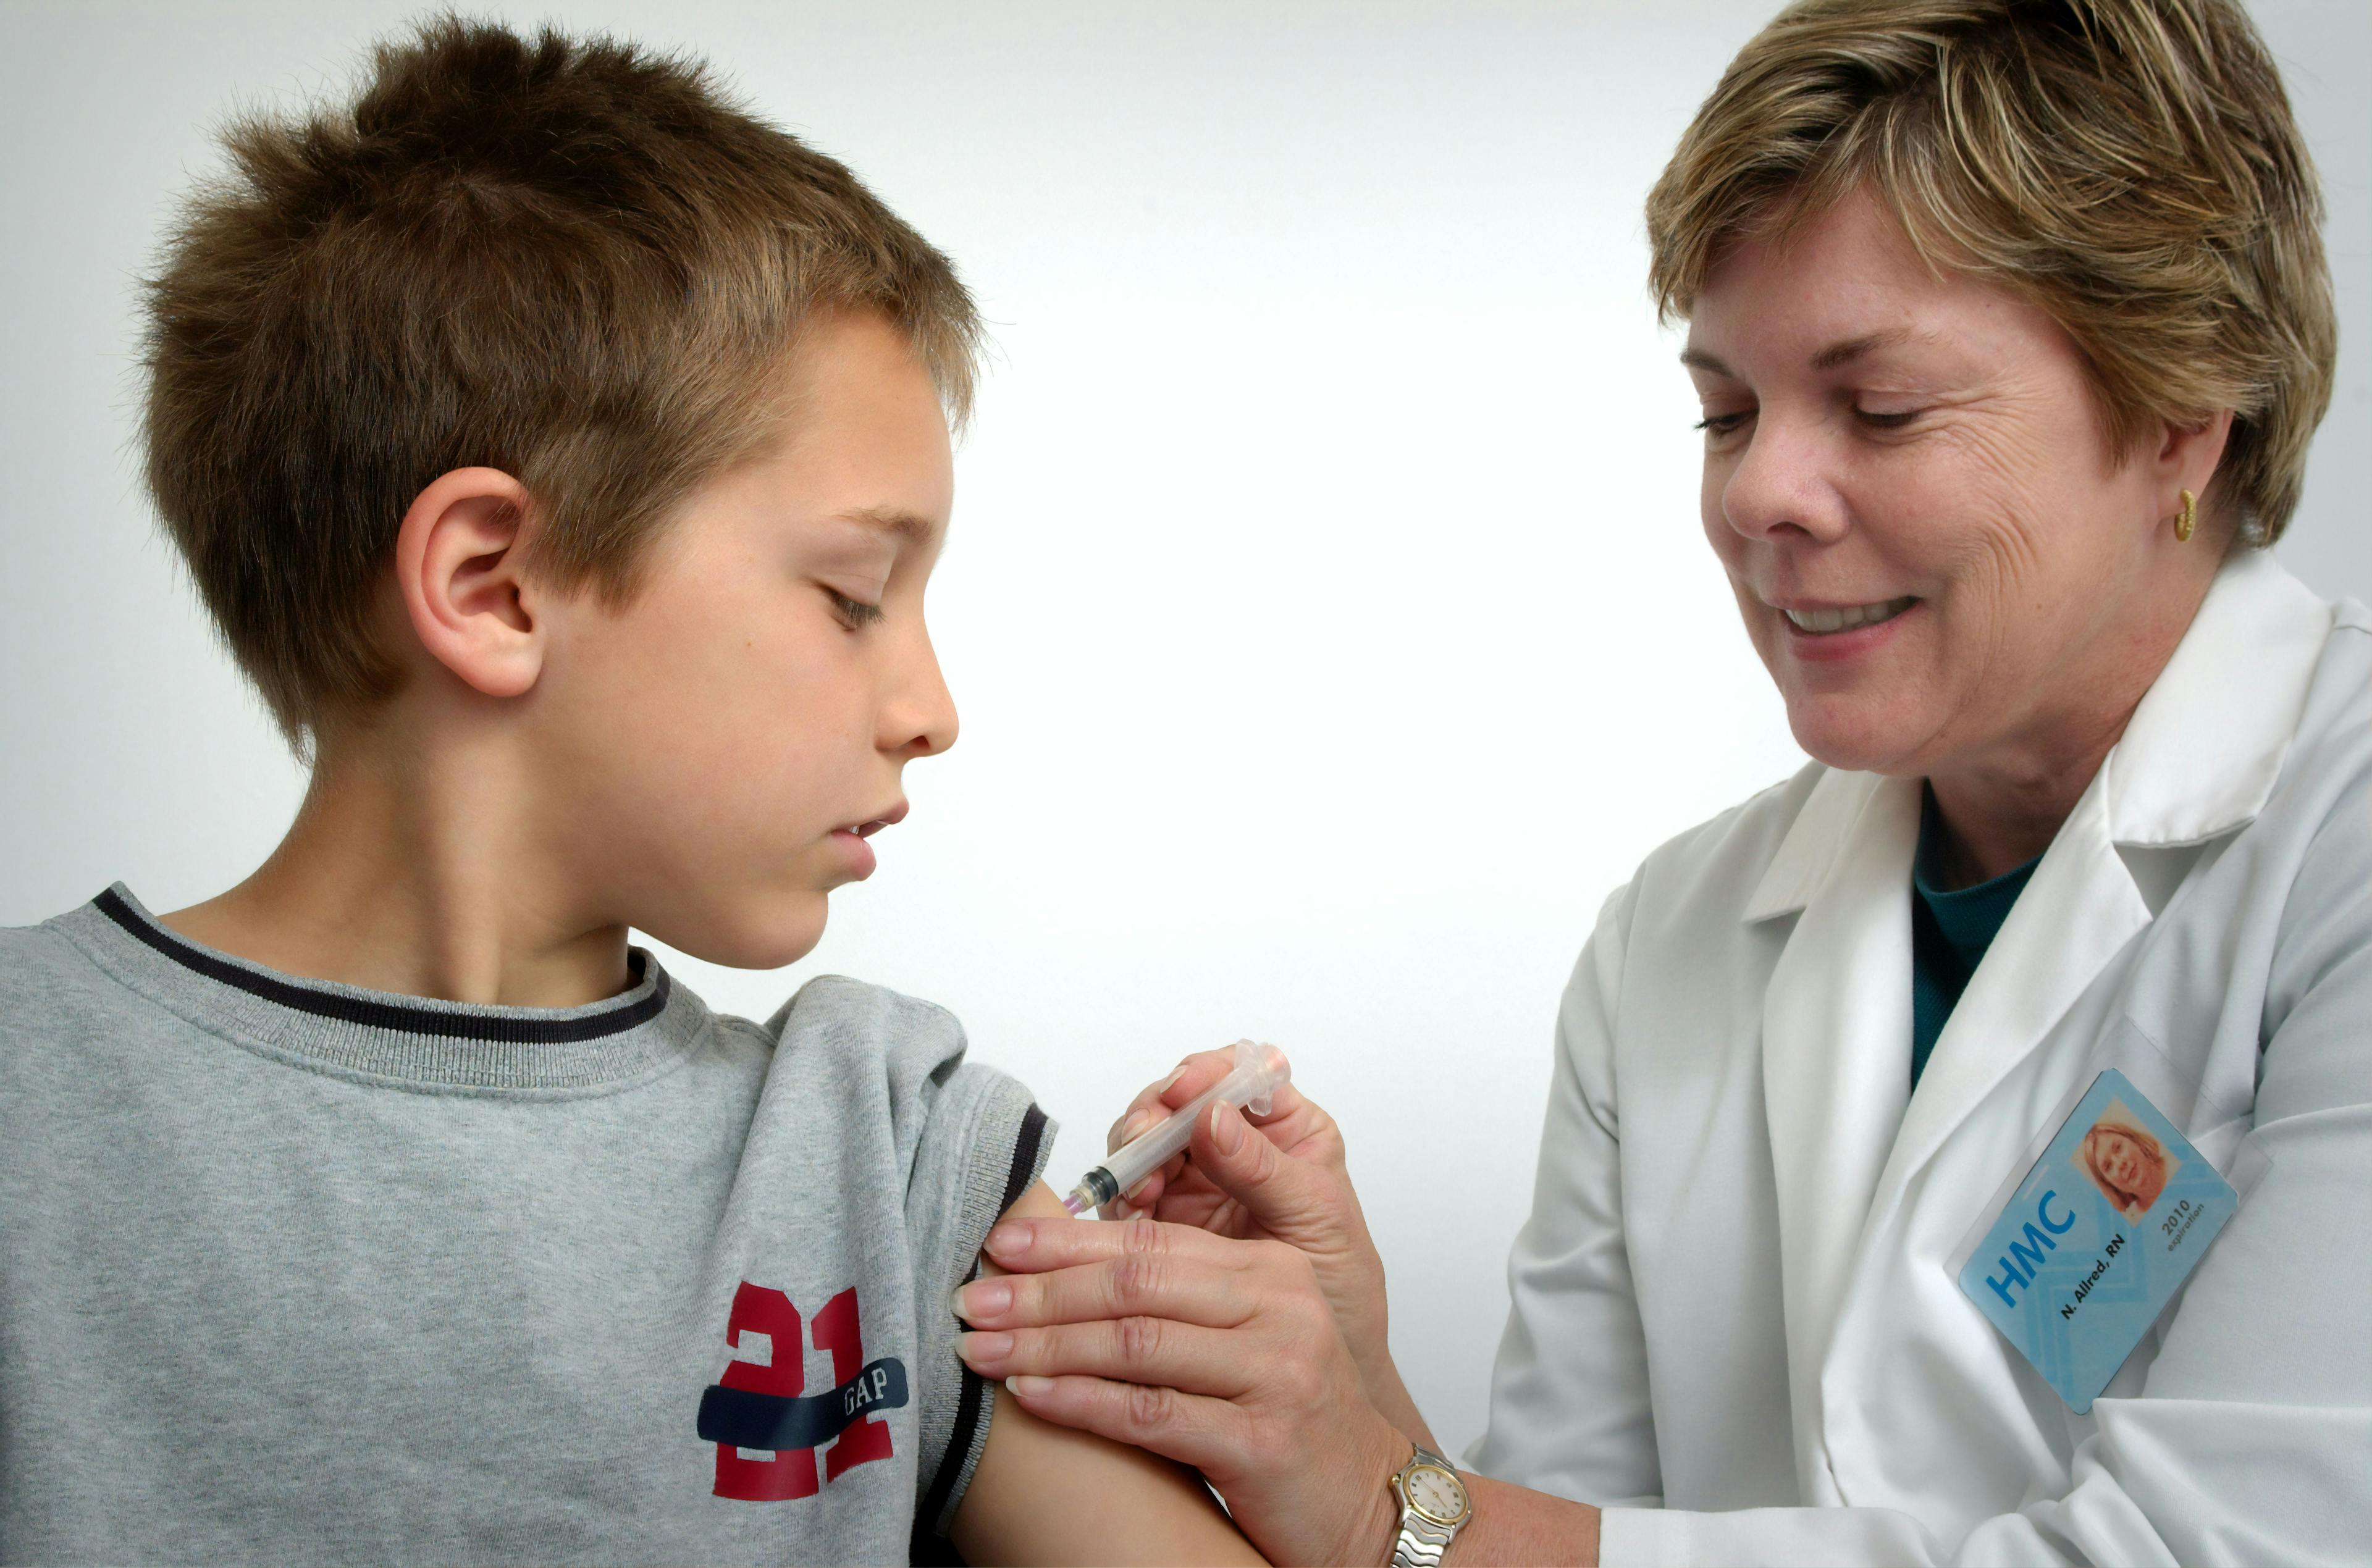 Plans to Vaccinate Children Against COVID-19 Among Vaccinated and Unvaccinated Parents 